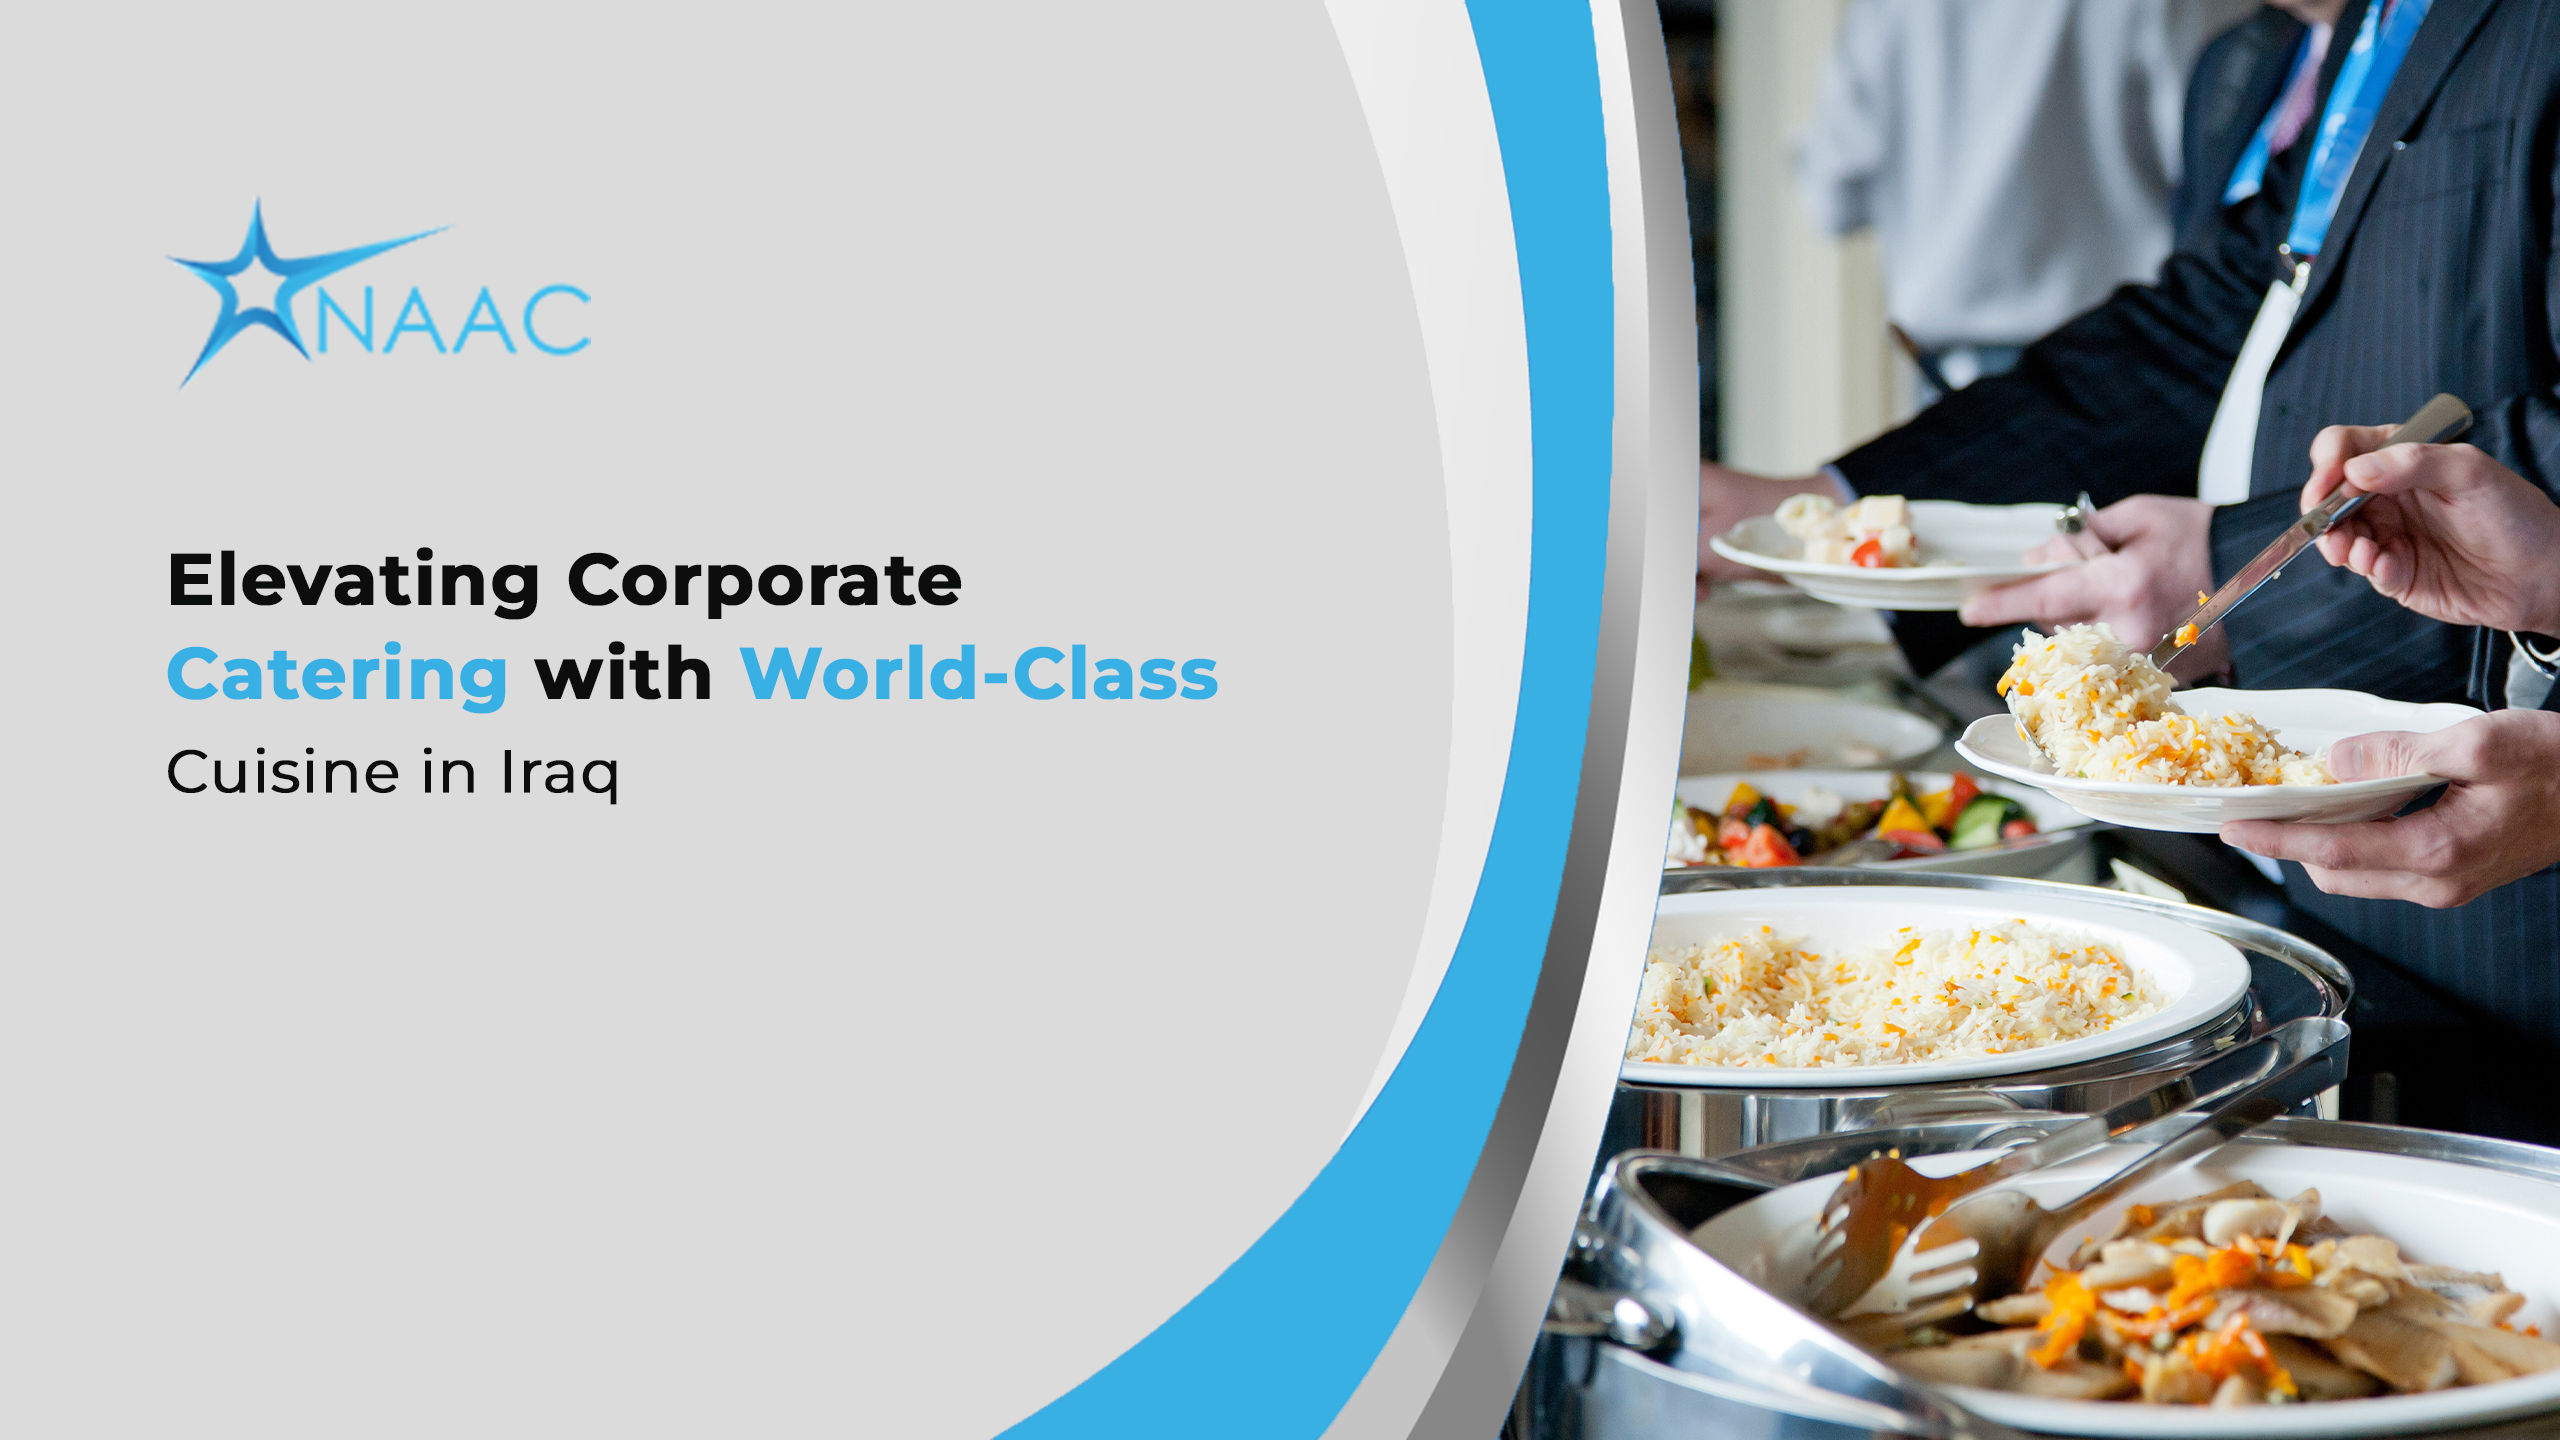 NAAC: Elevating Corporate Catering with World-Class Cuisine in Iraq